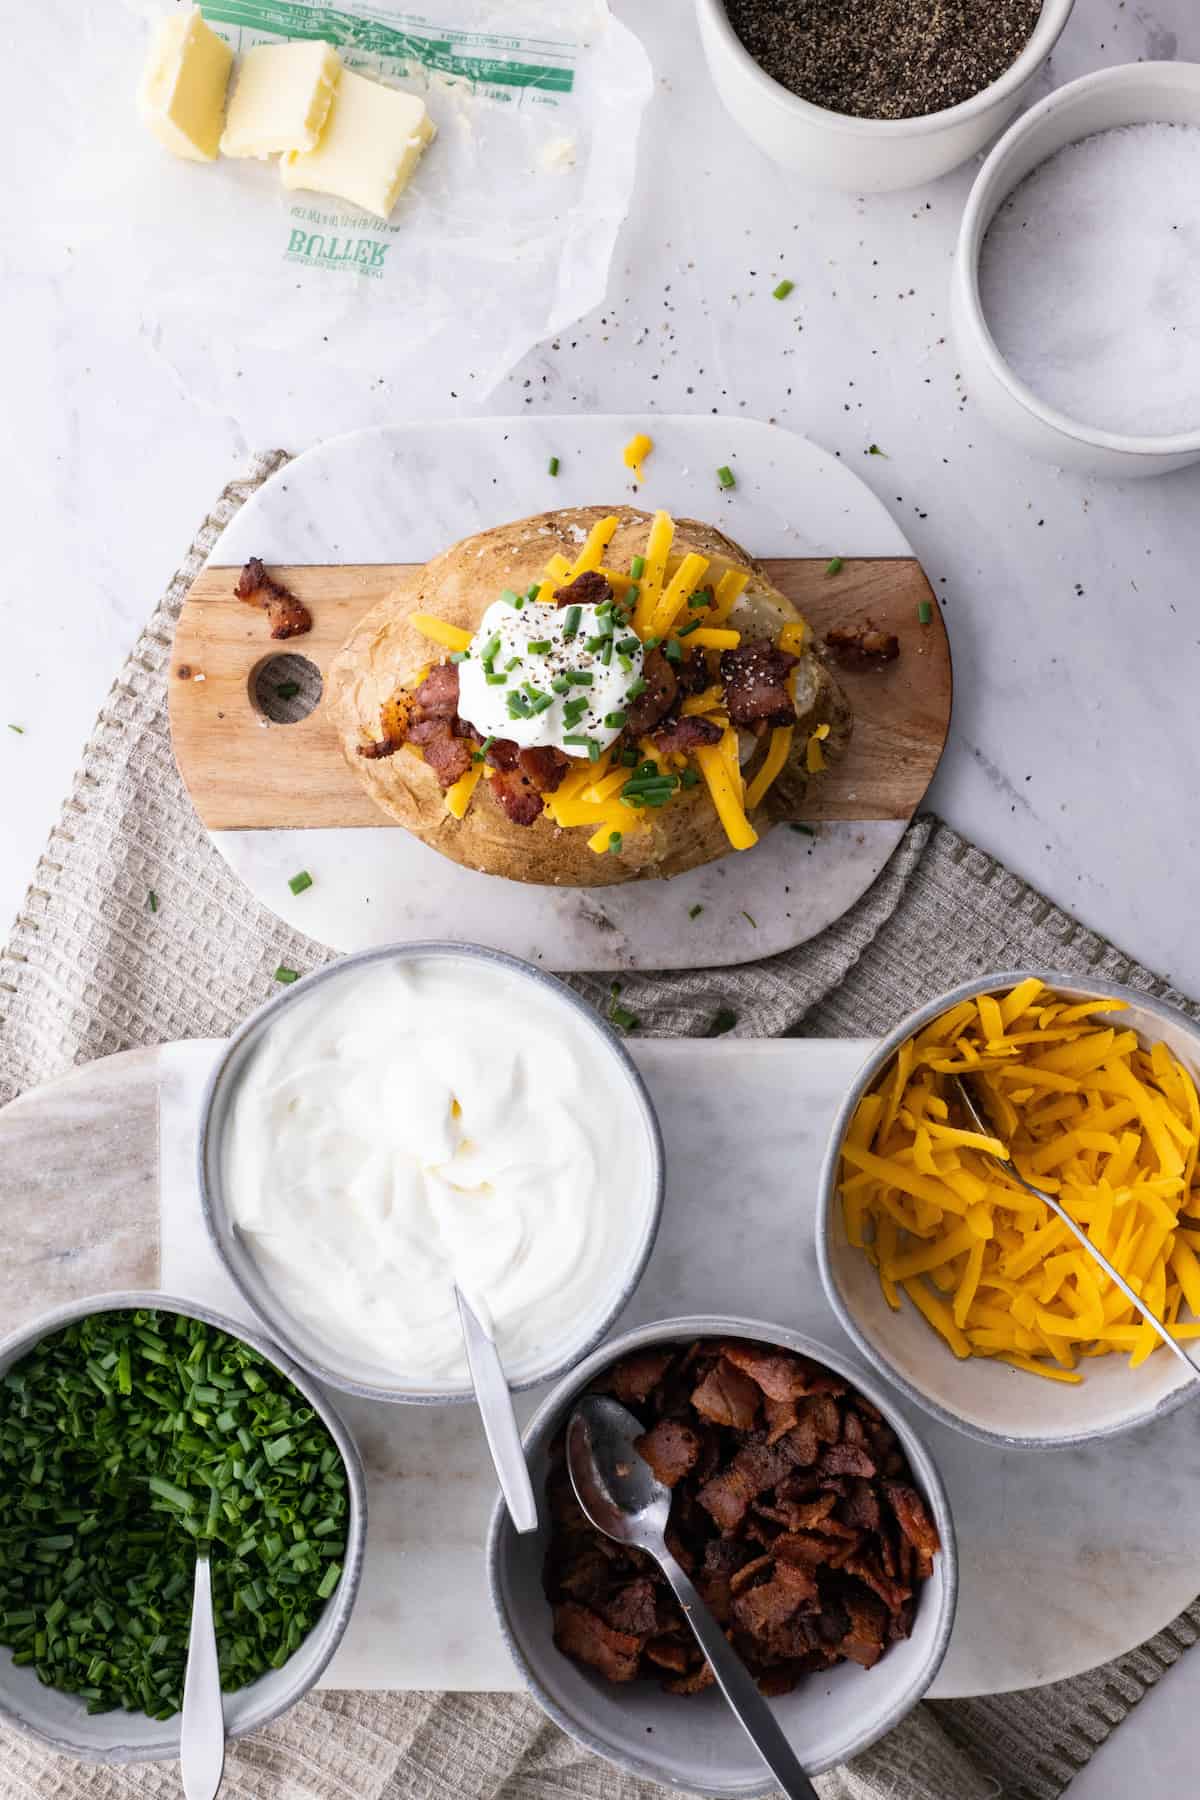 A baked potato on a cutting board with cheese, bacon, and other toppings